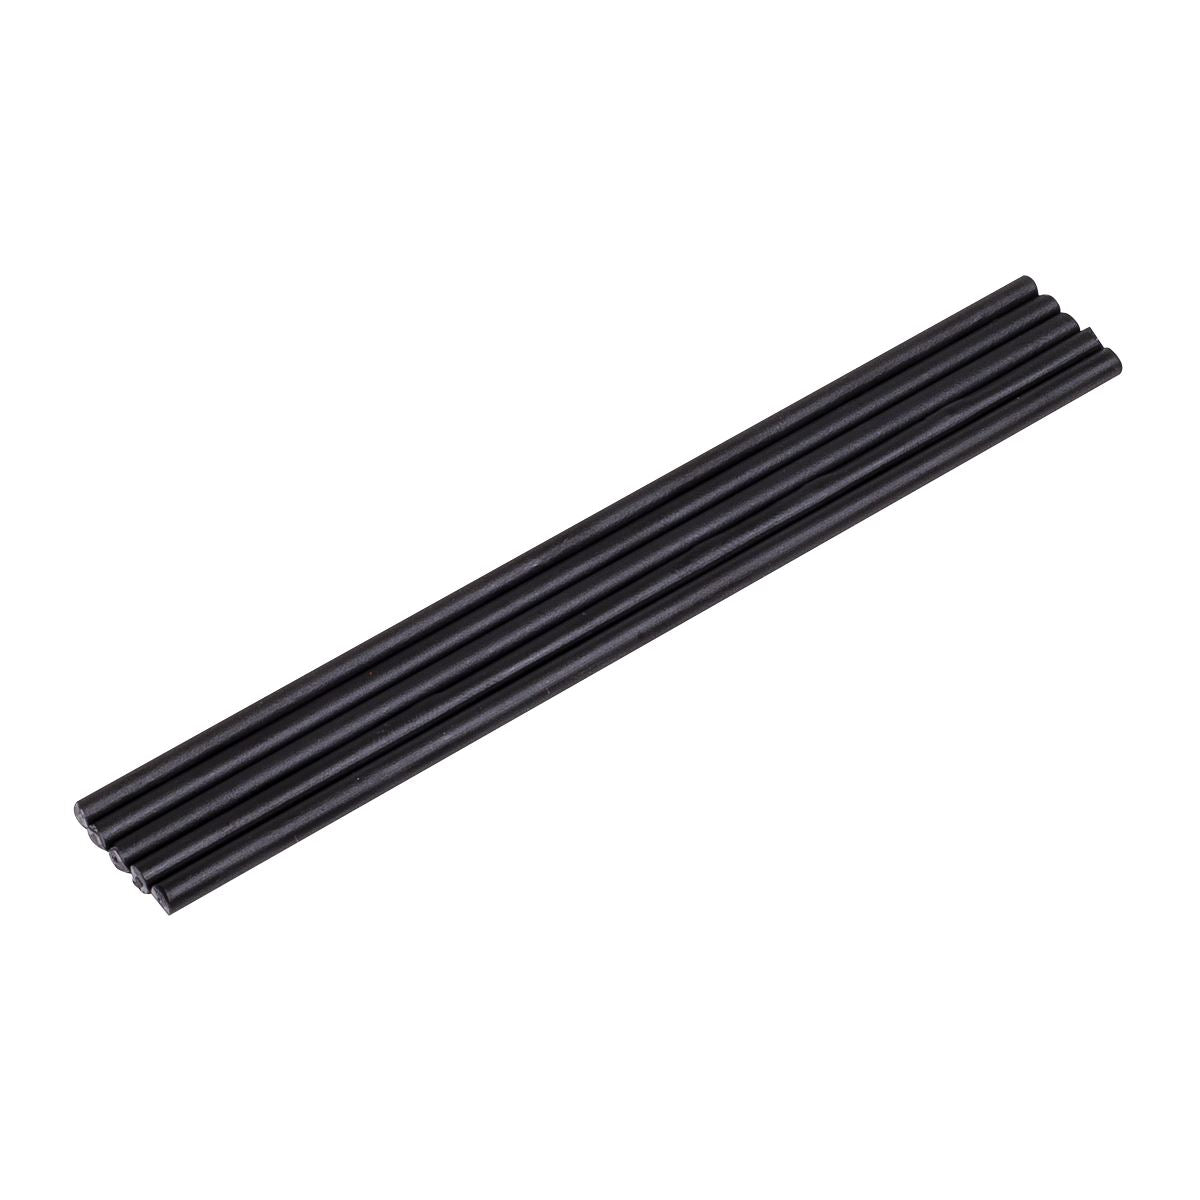 Sealey ABS Plastic Welding Rod - Pack of 5